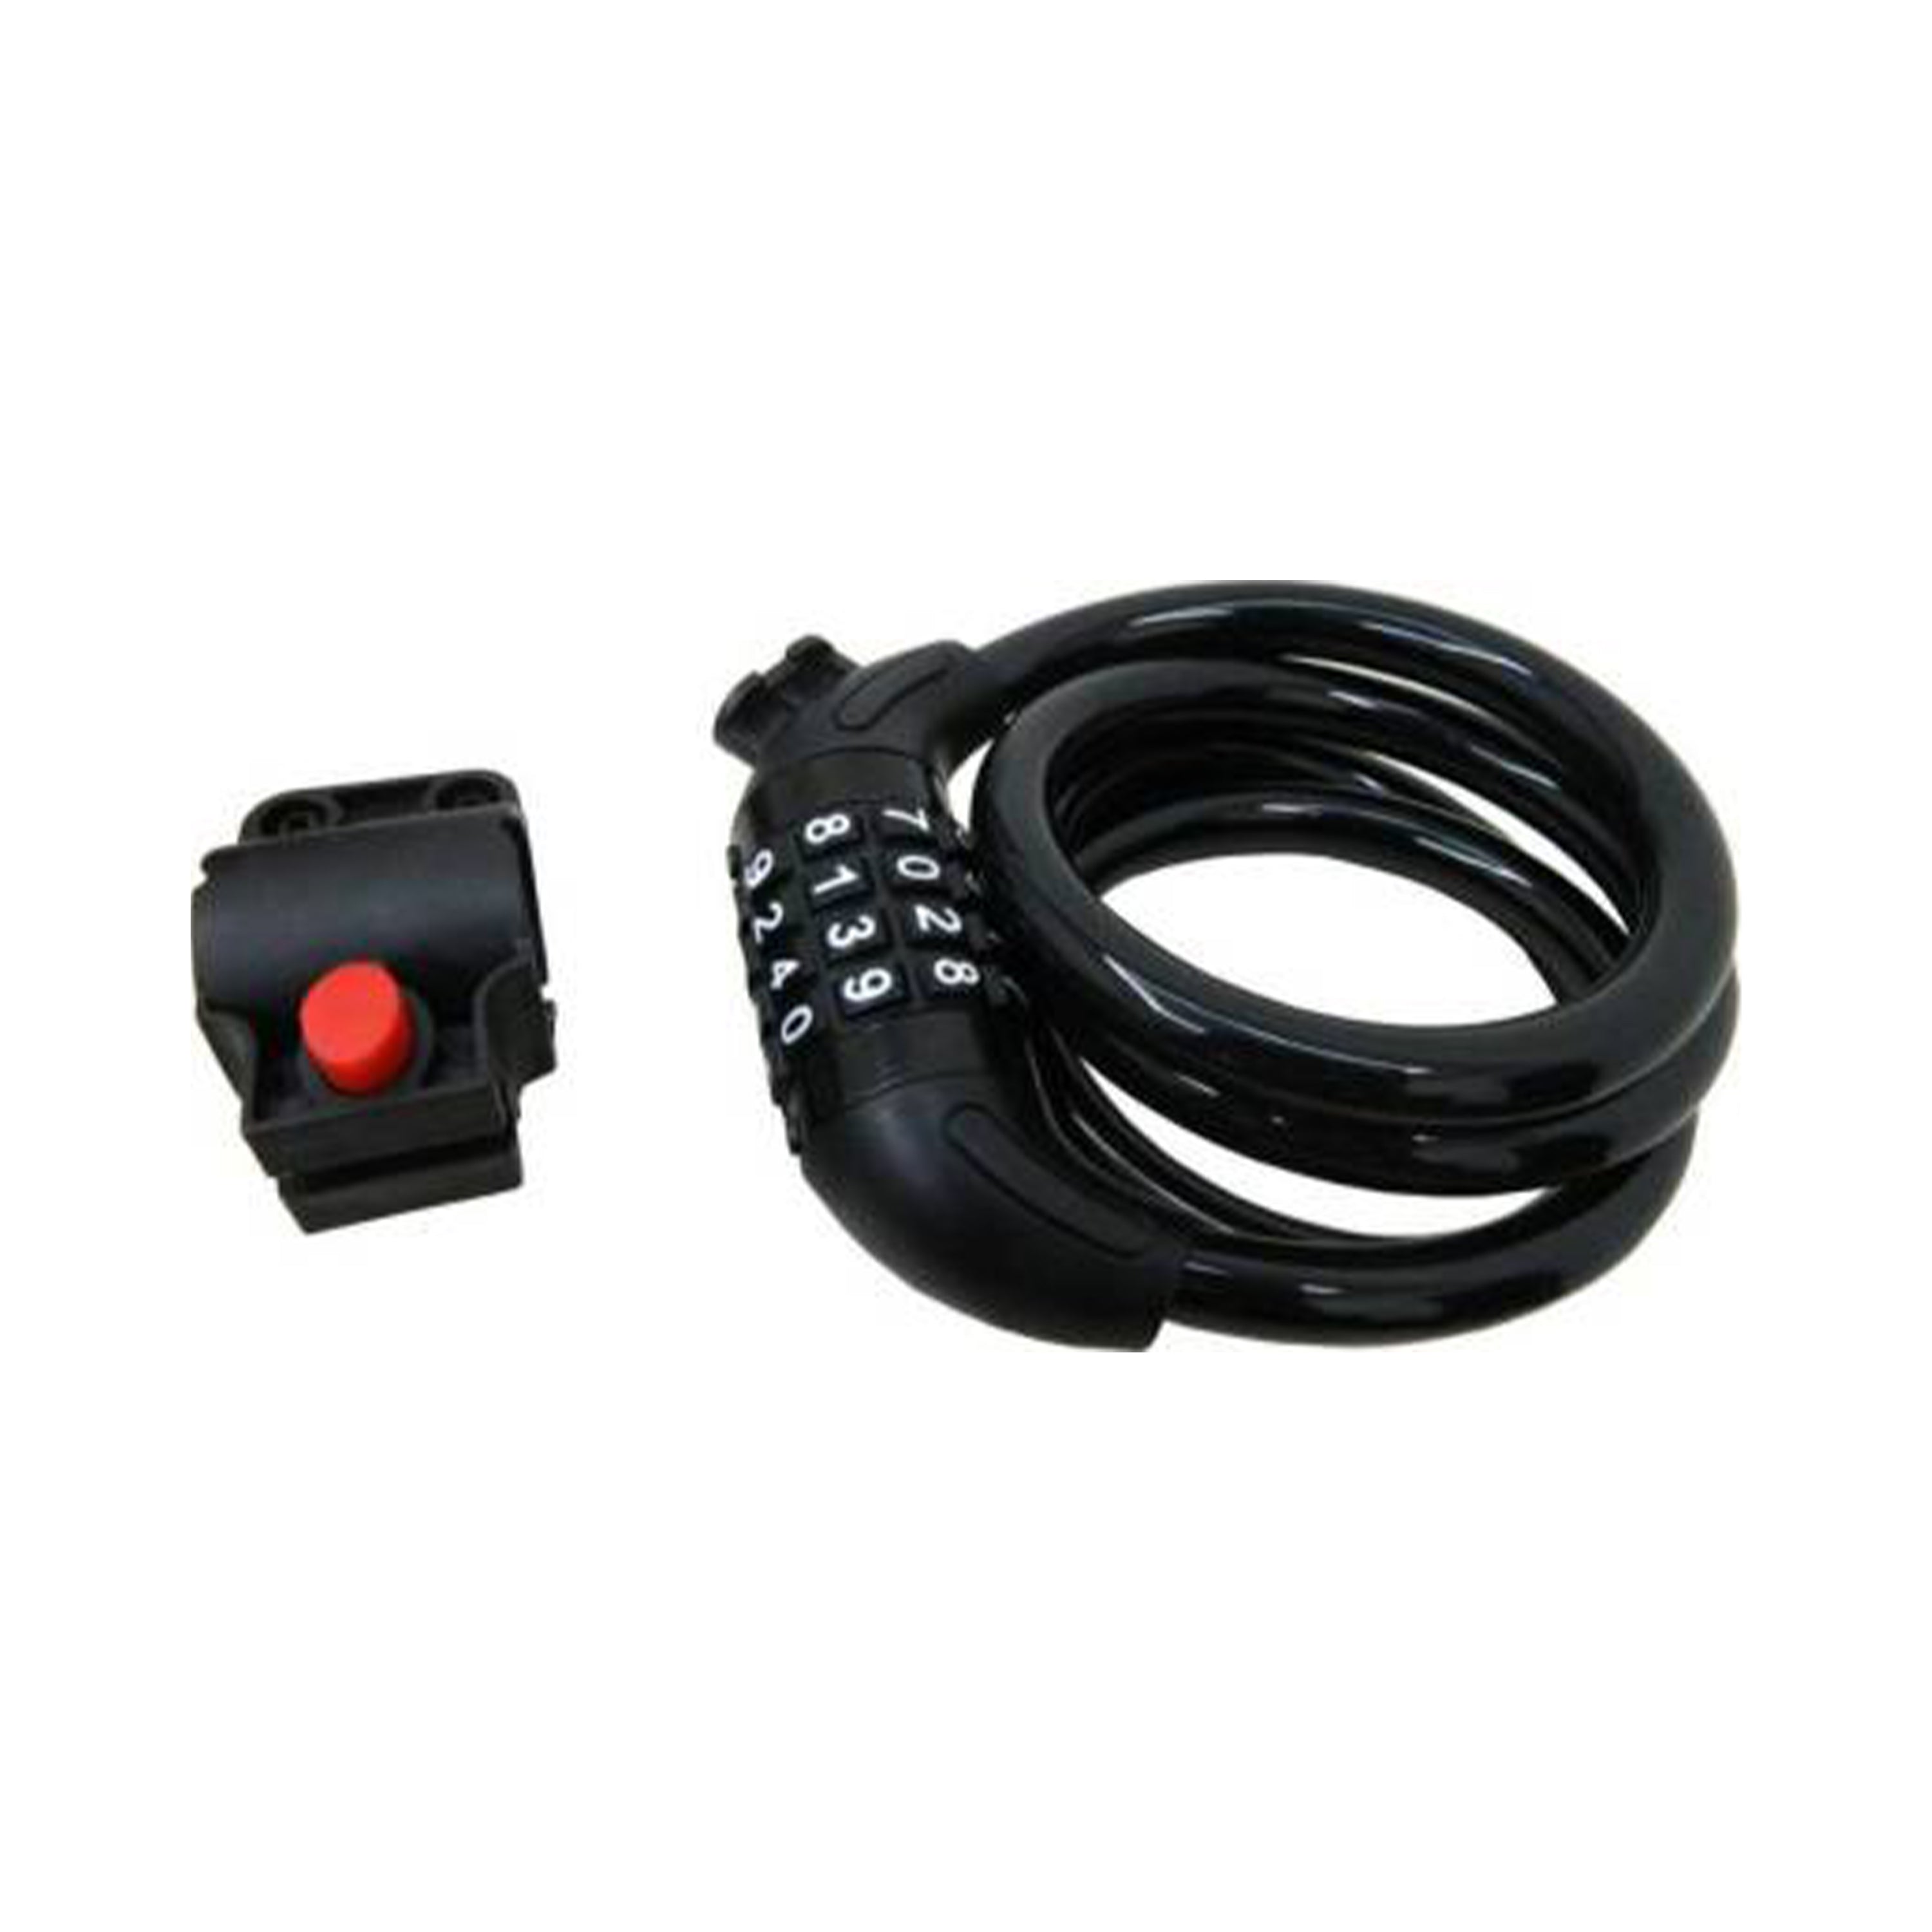 Leader Bicycle 4 Digit Resettable Number Lock with Clamp